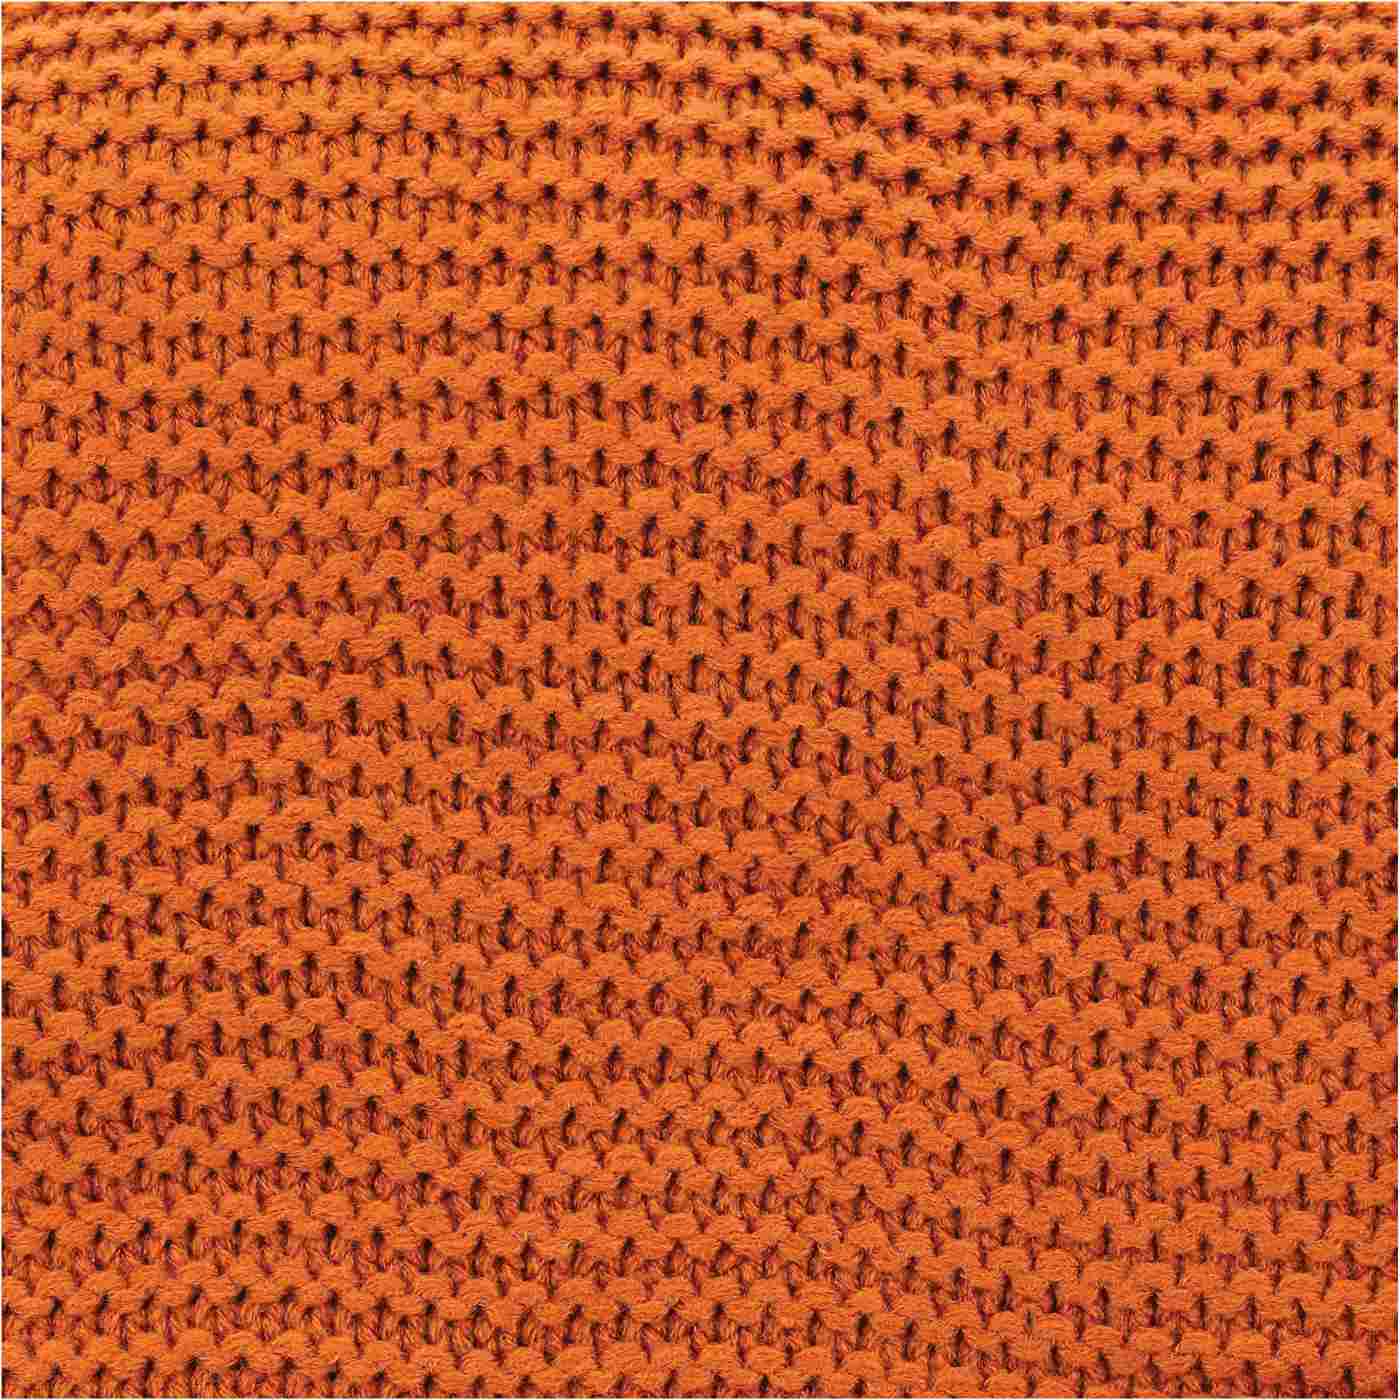 Haven + Key Cozy Sweater Knit Throw Blanket - Terracotta; image 2 of 2